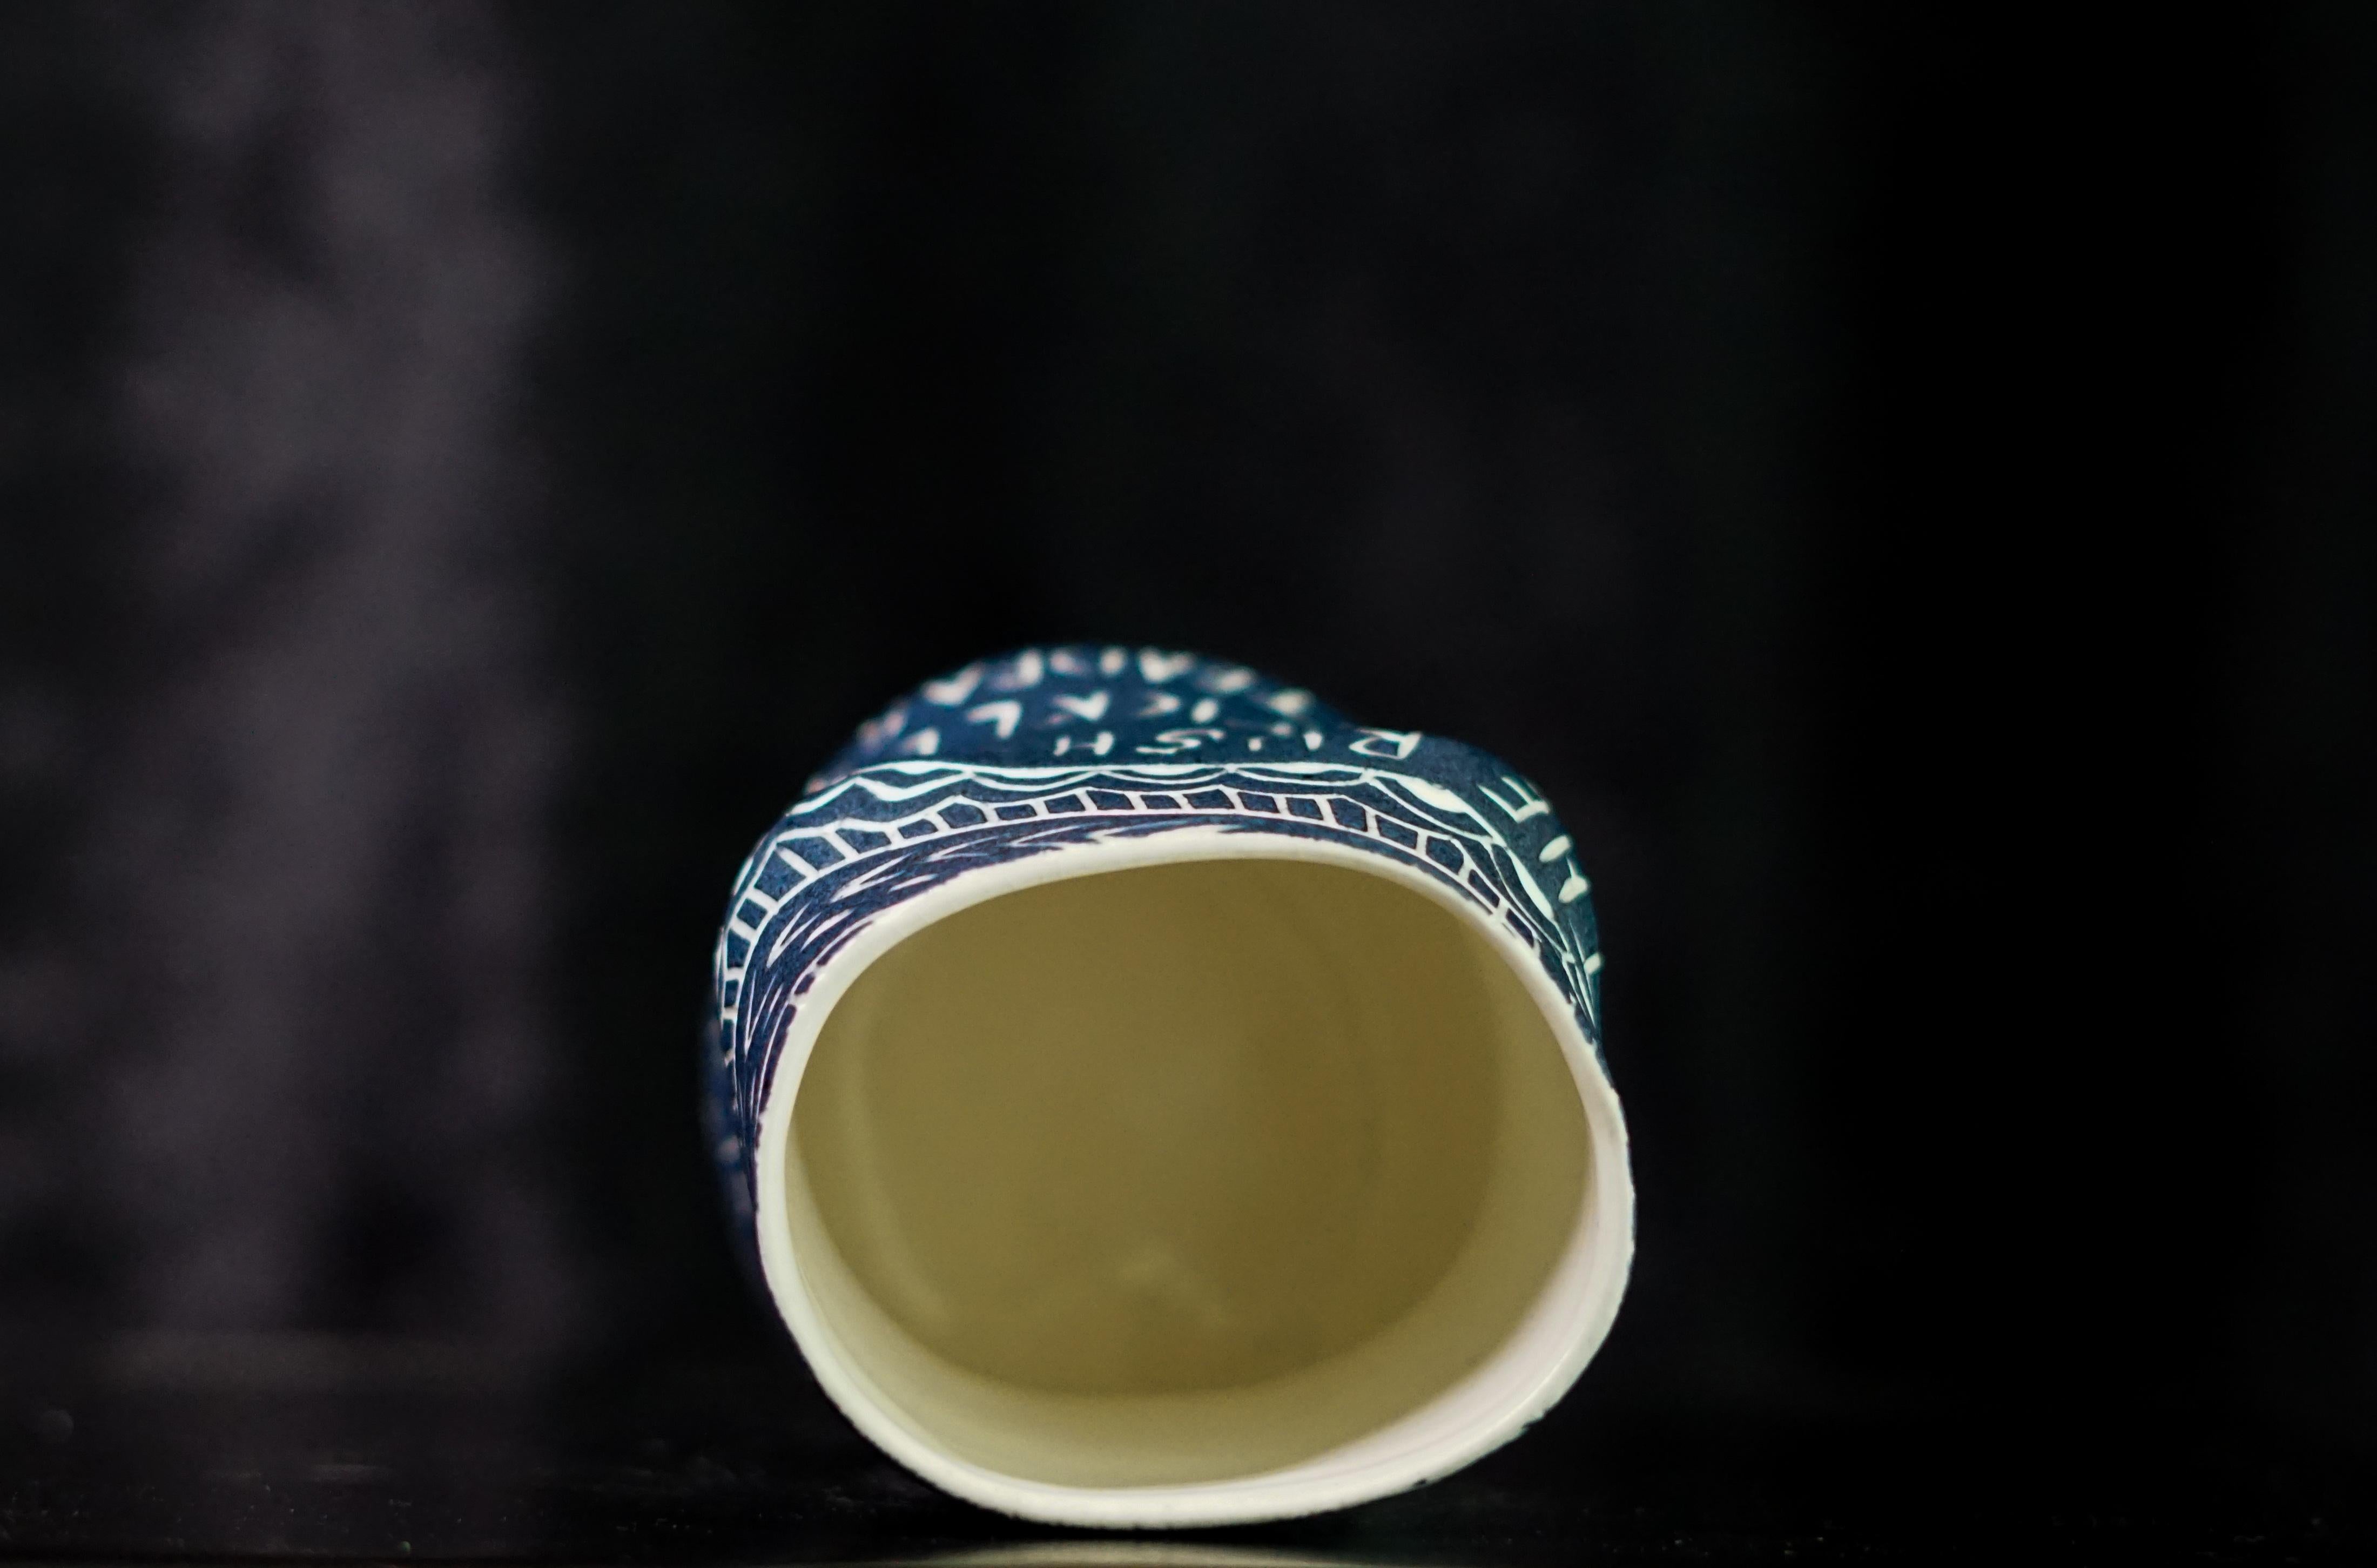 “The Rush of Love..” Porcelain cup with sgraffito detailing by the artist For Sale 2